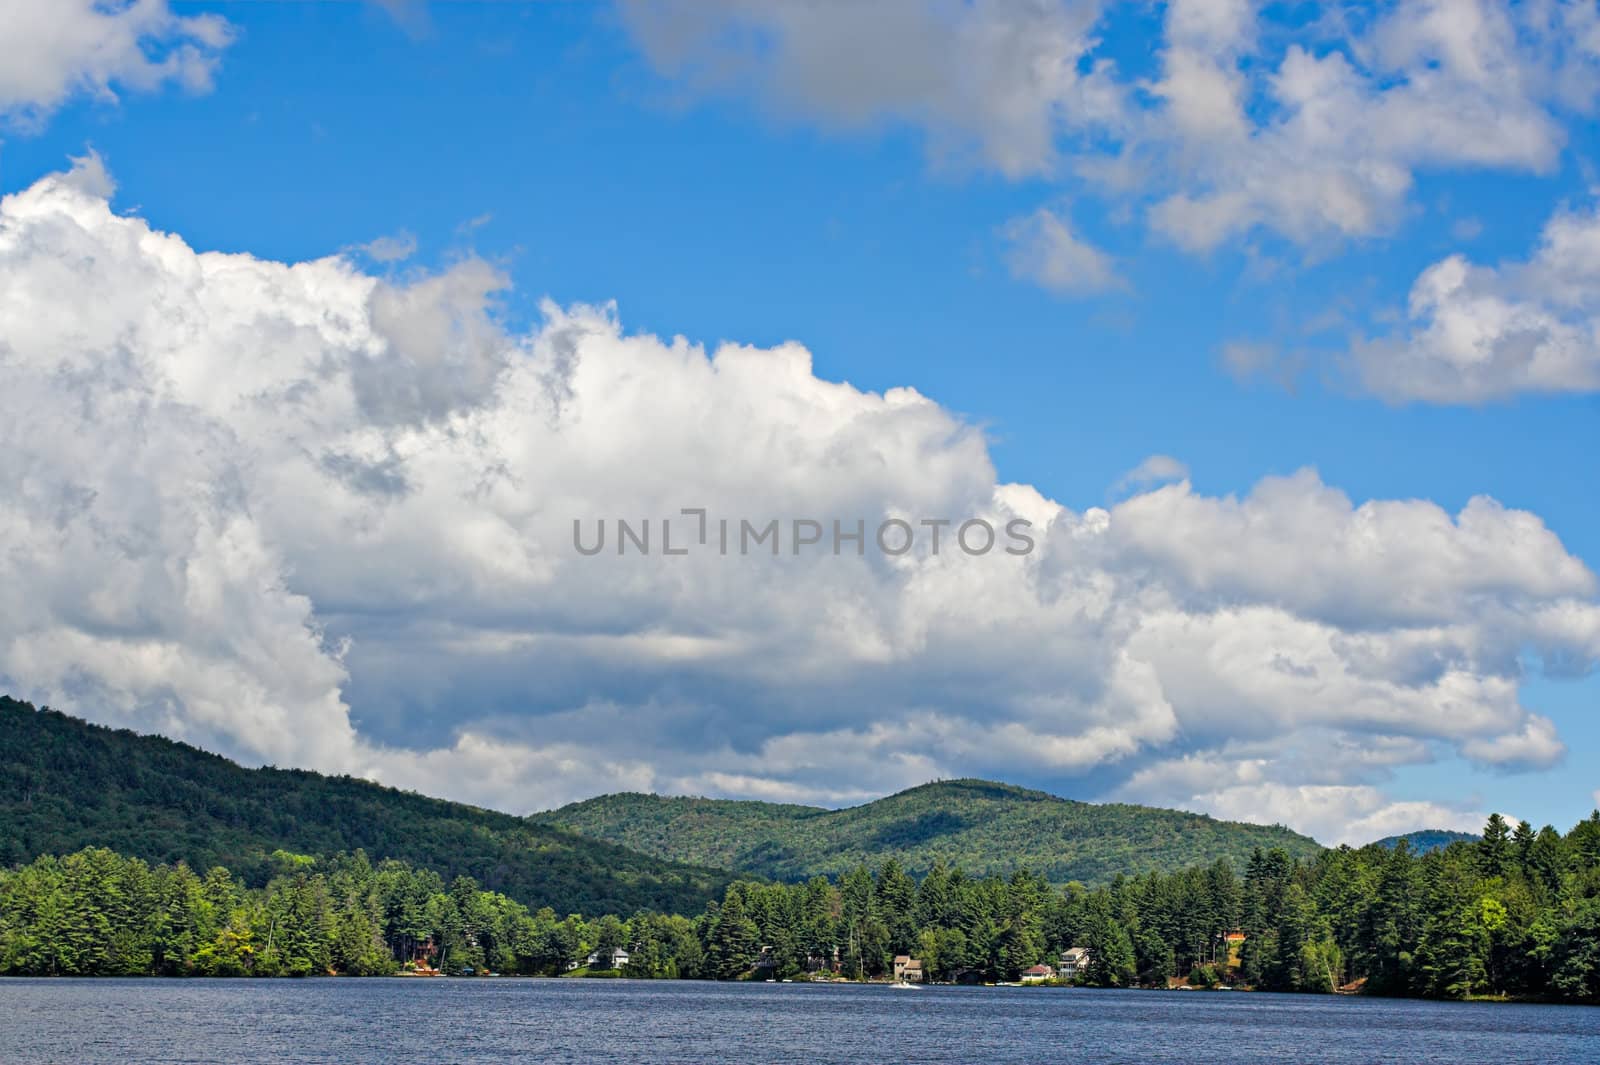 Mountains at the shoreline of a lake with large cumulus clouds in the sky above.